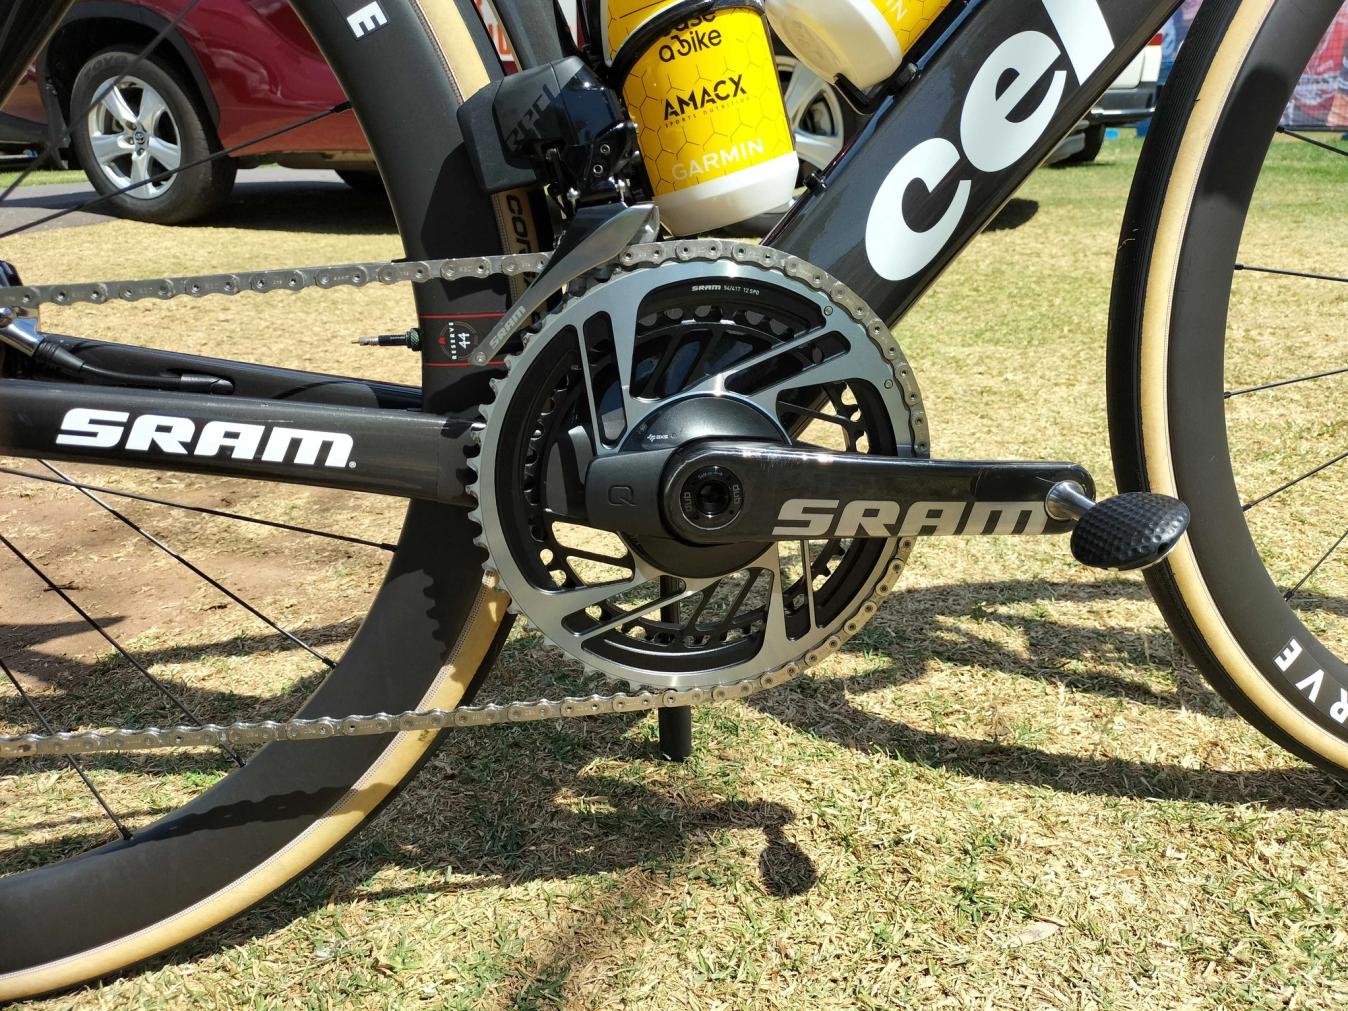 The team stuck to 2x groupsets at the Tour Down Under